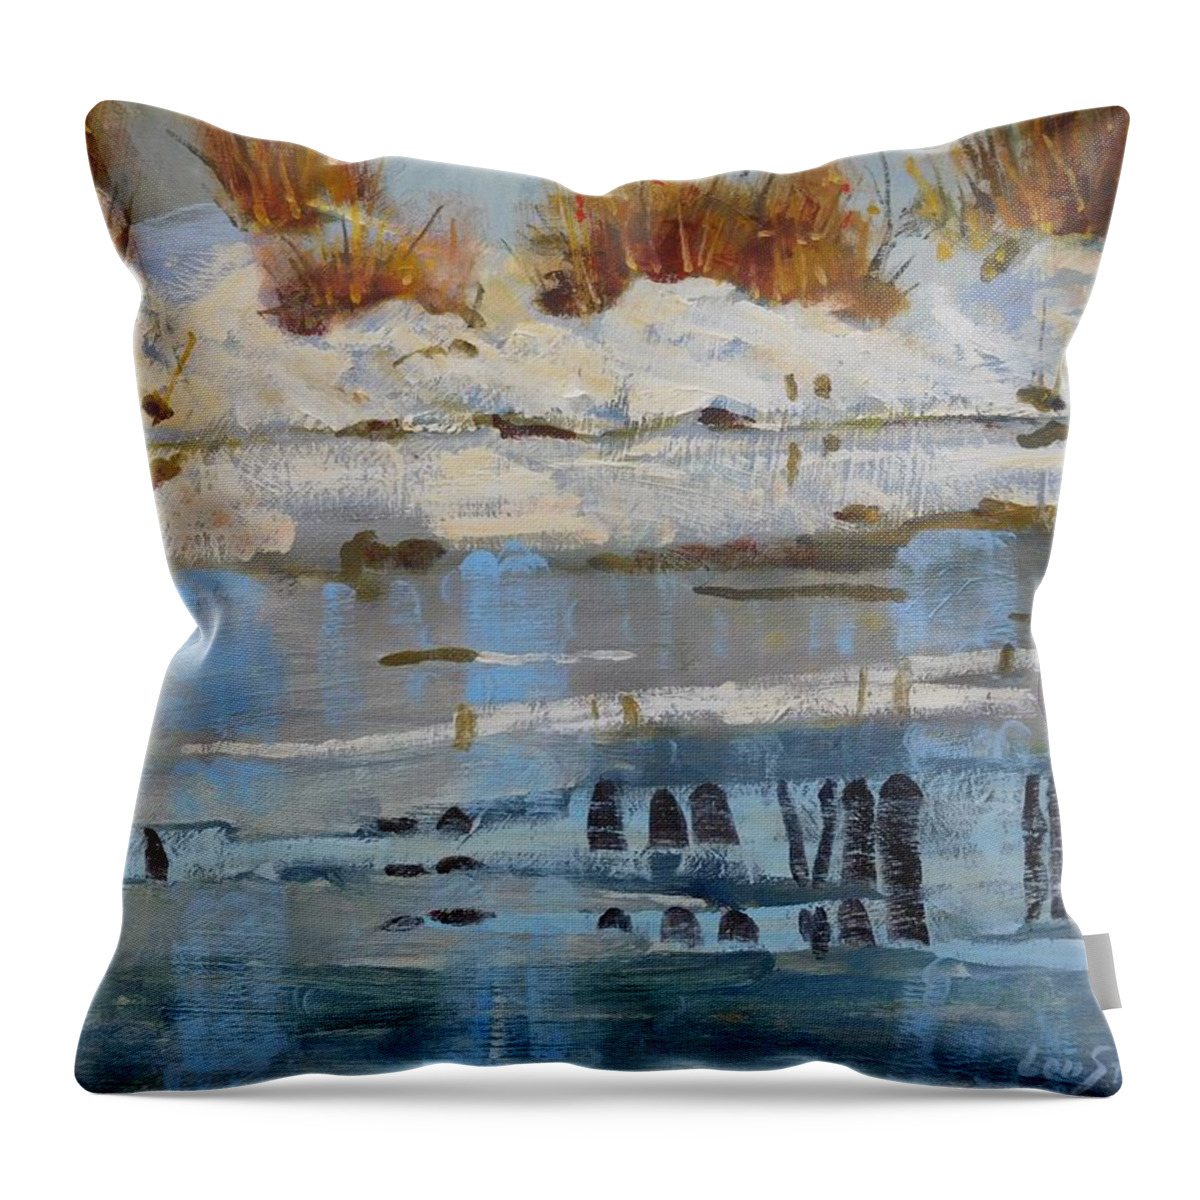 New Ice Throw Pillow featuring the painting Extra Thin Ice by Len Stomski